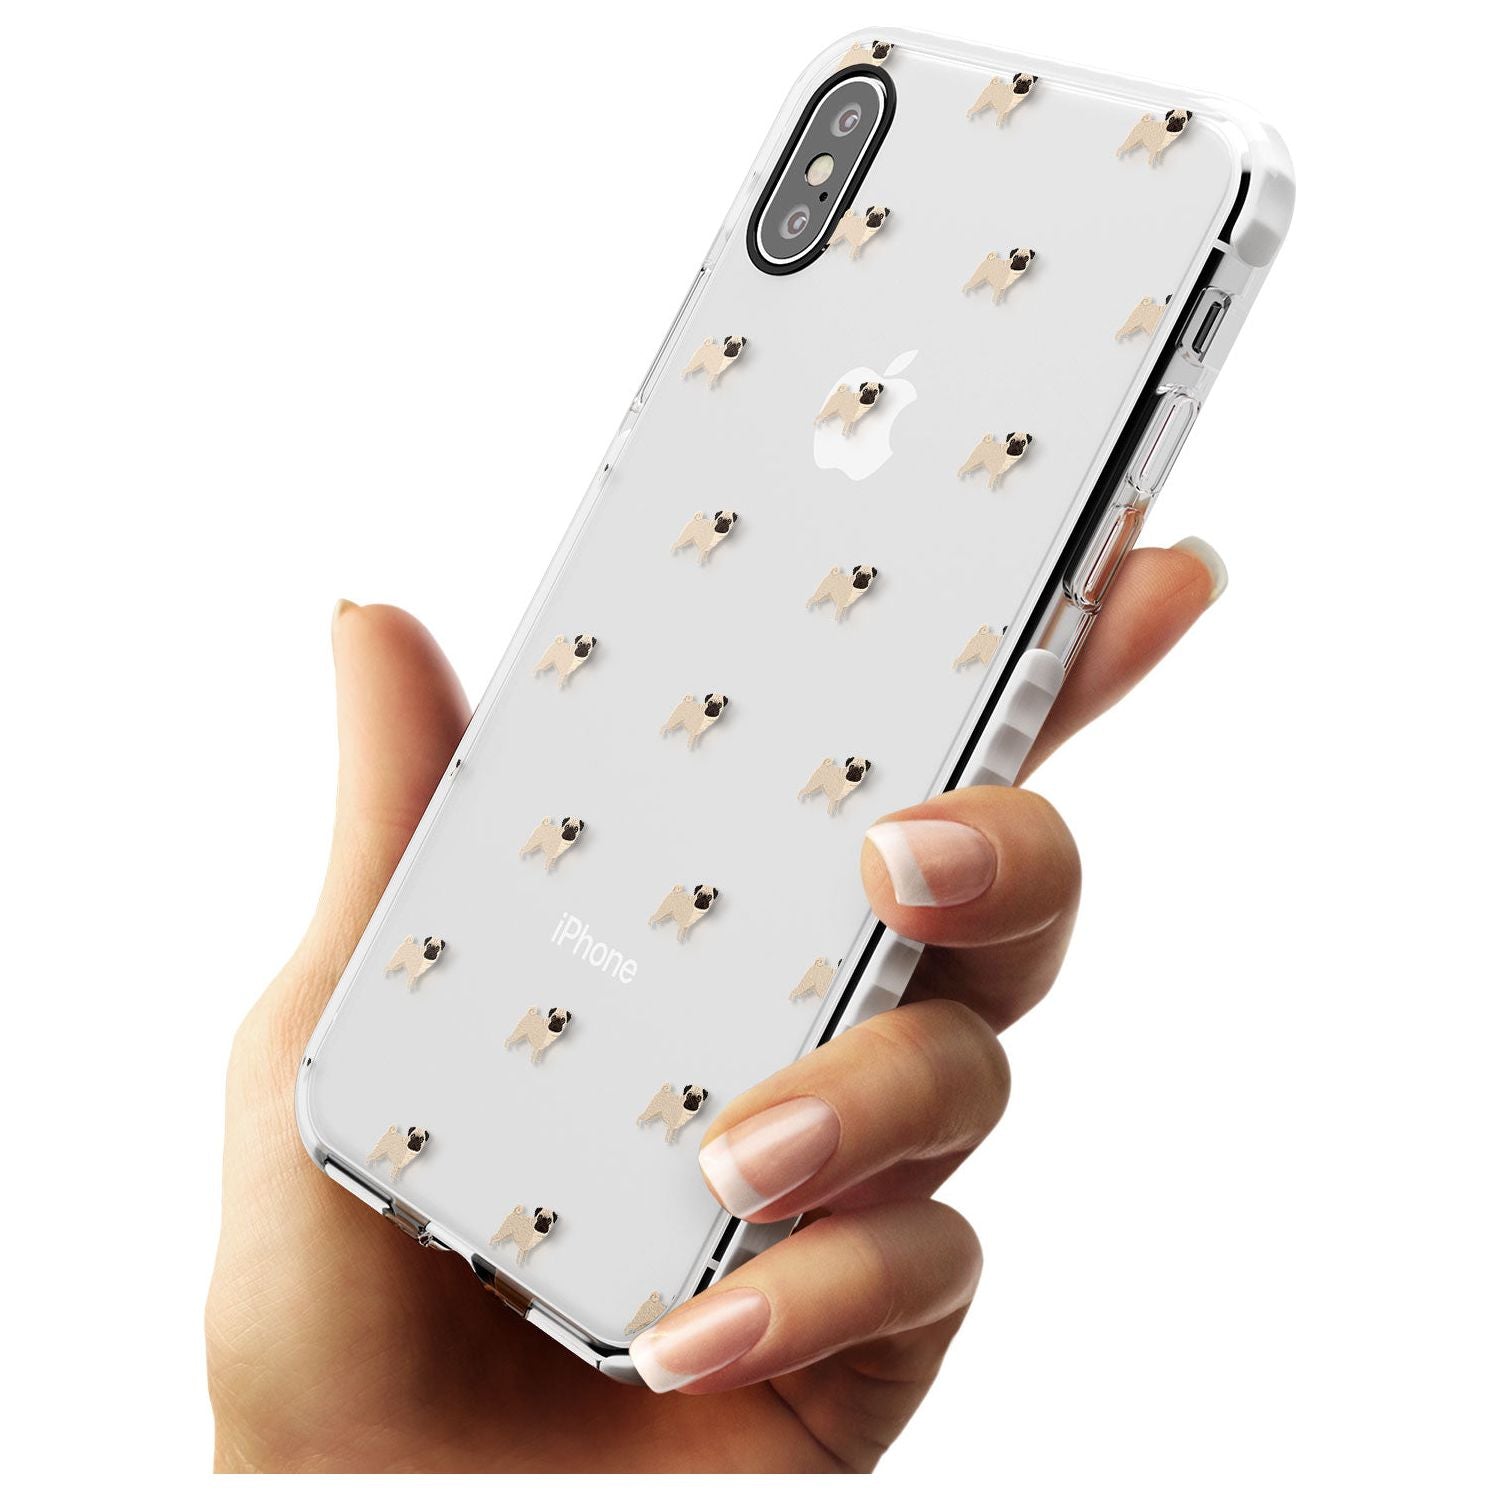 Pug Dog Pattern Clear Impact Phone Case for iPhone X XS Max XR